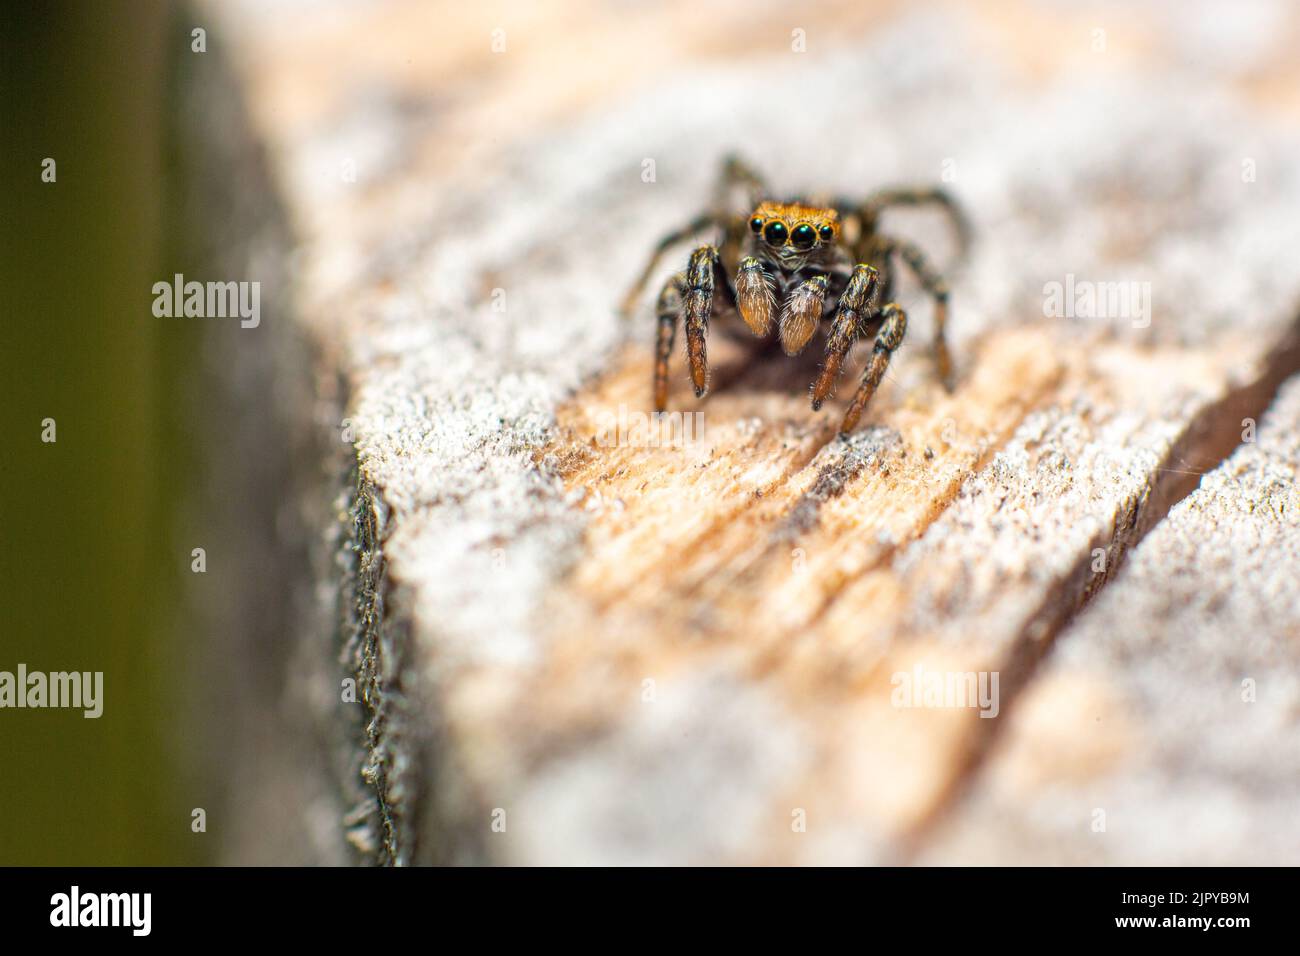 A Salticidae jumping spider on a piece of wood Stock Photo